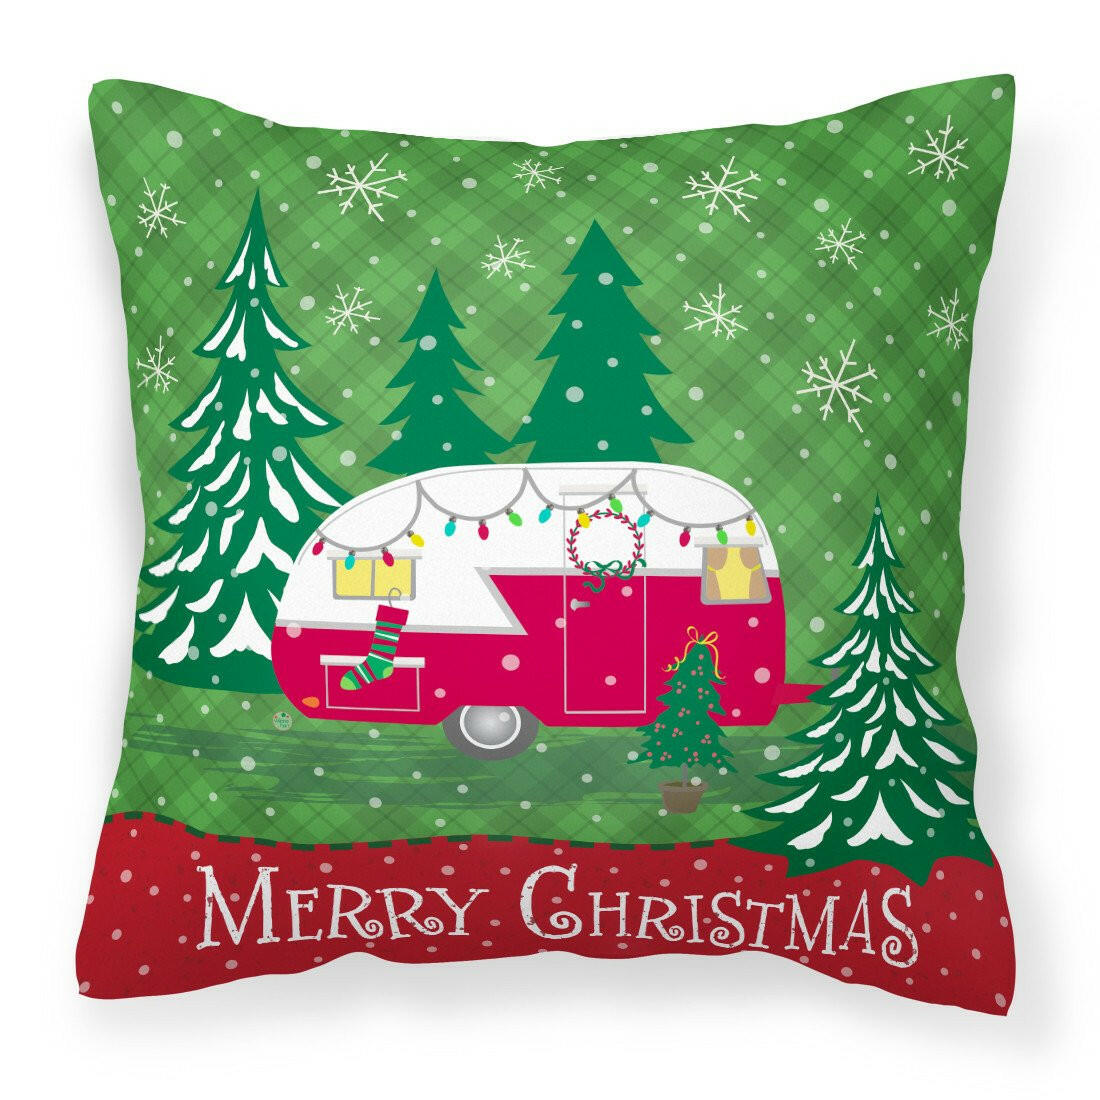 Christmas Vintage Glamping Trailer Fabric Decorative Pillow VHA3018PW1414 by Caroline's Treasures